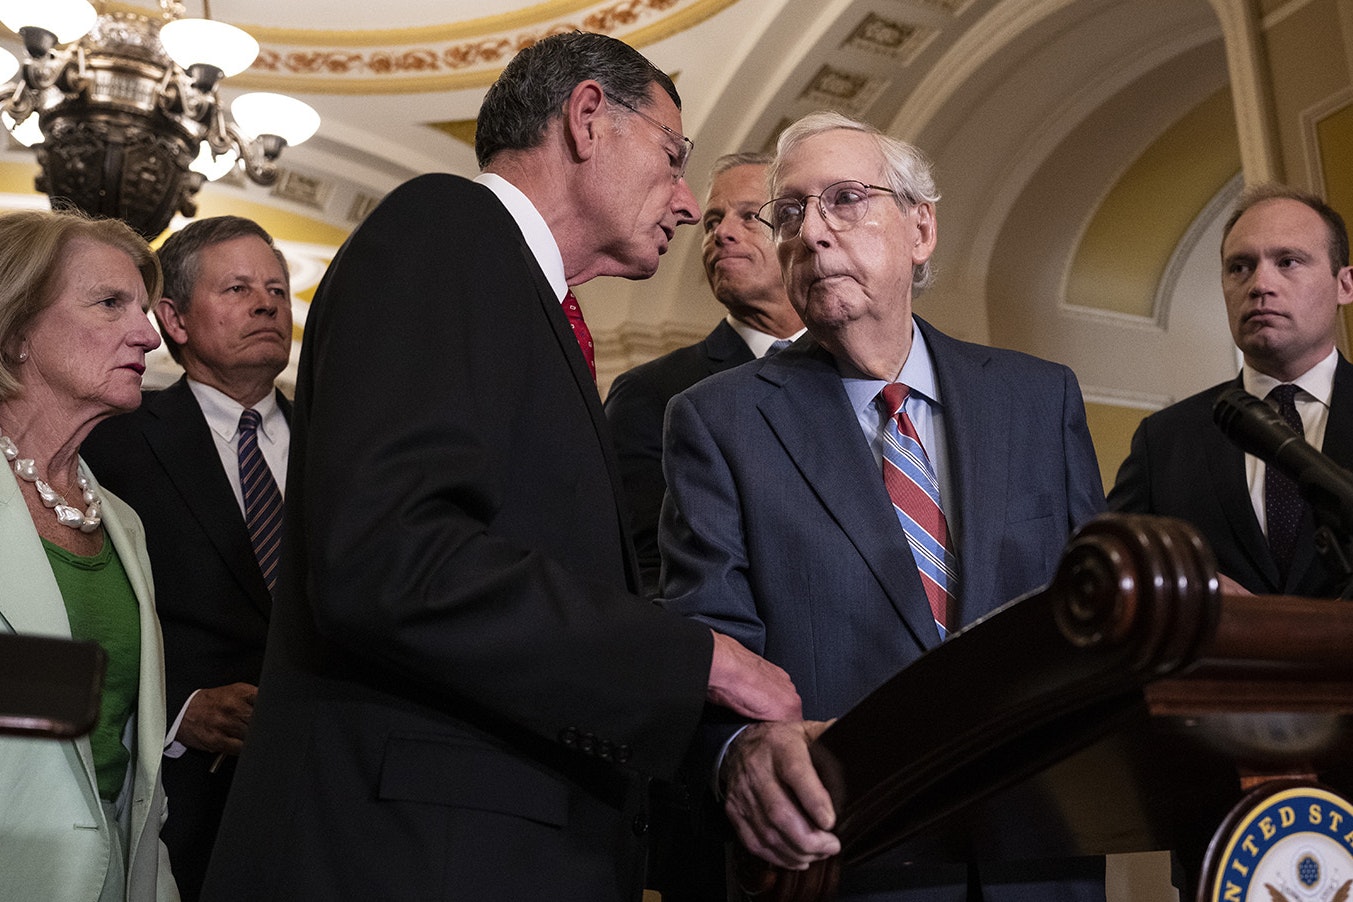 Sen. John Barrasso, R-Wyoming, reaches out to help Senate Minority Leader Mitch McConnell, R-Kentucky, after McConnell froze and stopped talking at the microphones during a news conference after a lunch meeting with Senate Republicans at the U.S. Capitol on Wednesday.